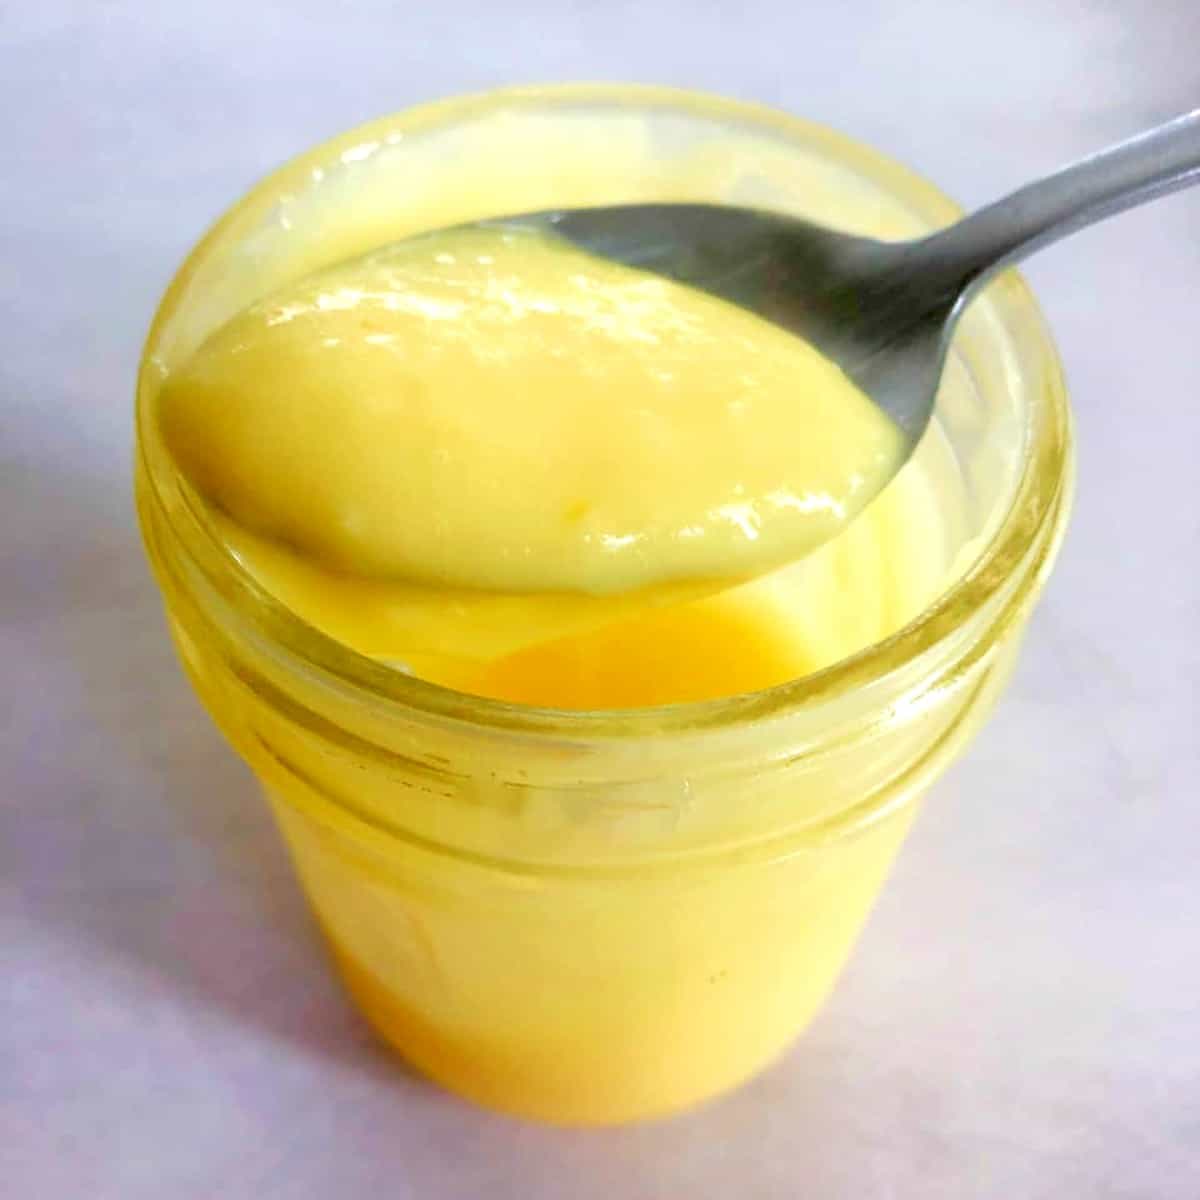 a spoonful of lemon curd from a jar.